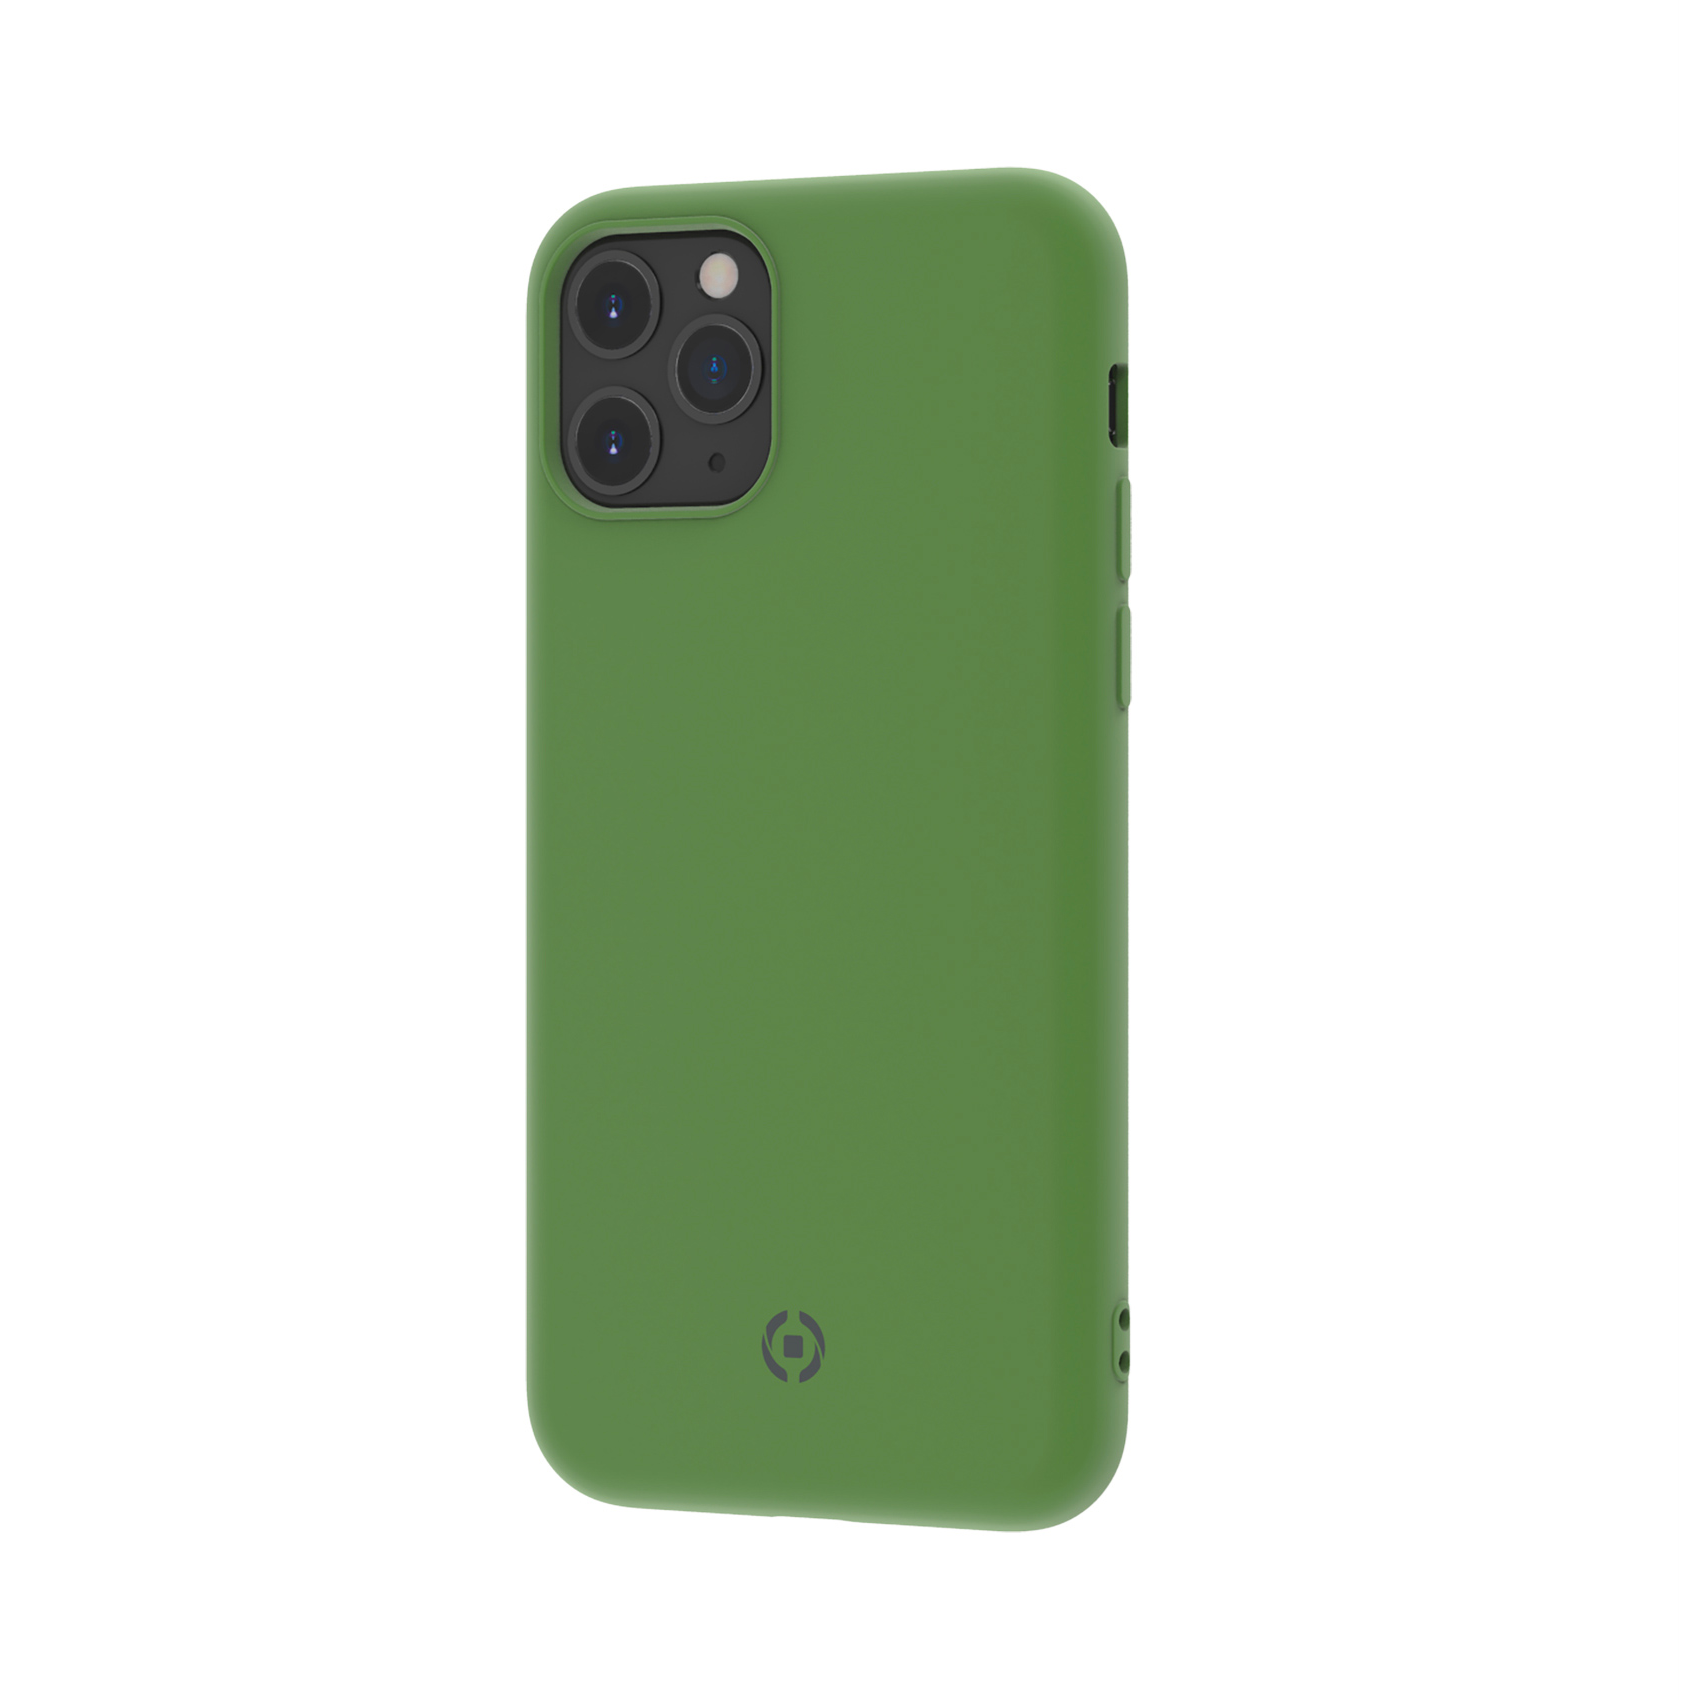 Leaf Iphone 11 Pro Gn Celly Leaf1000gn 8021735753322